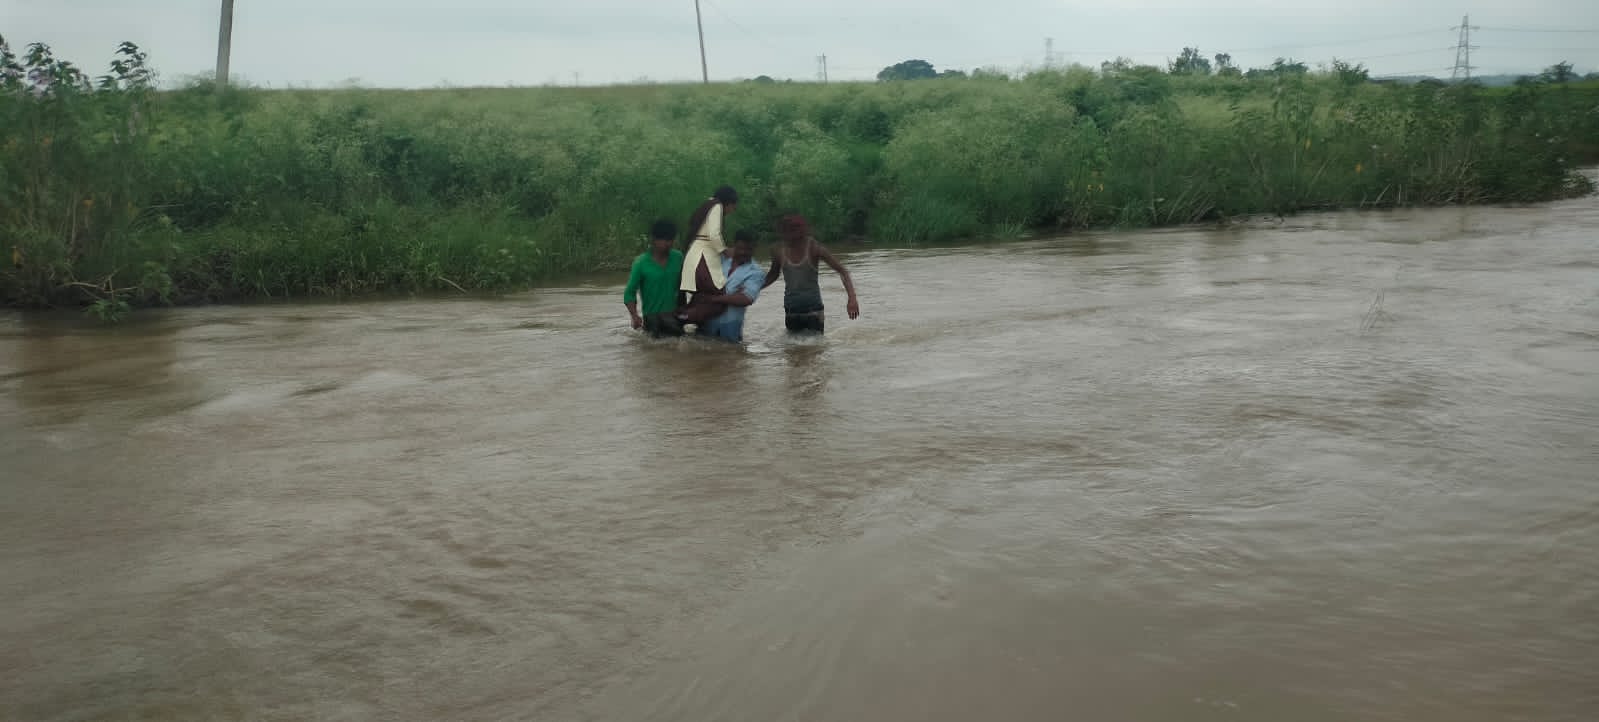 The helpless father carried the daughter across the river and took her to school.